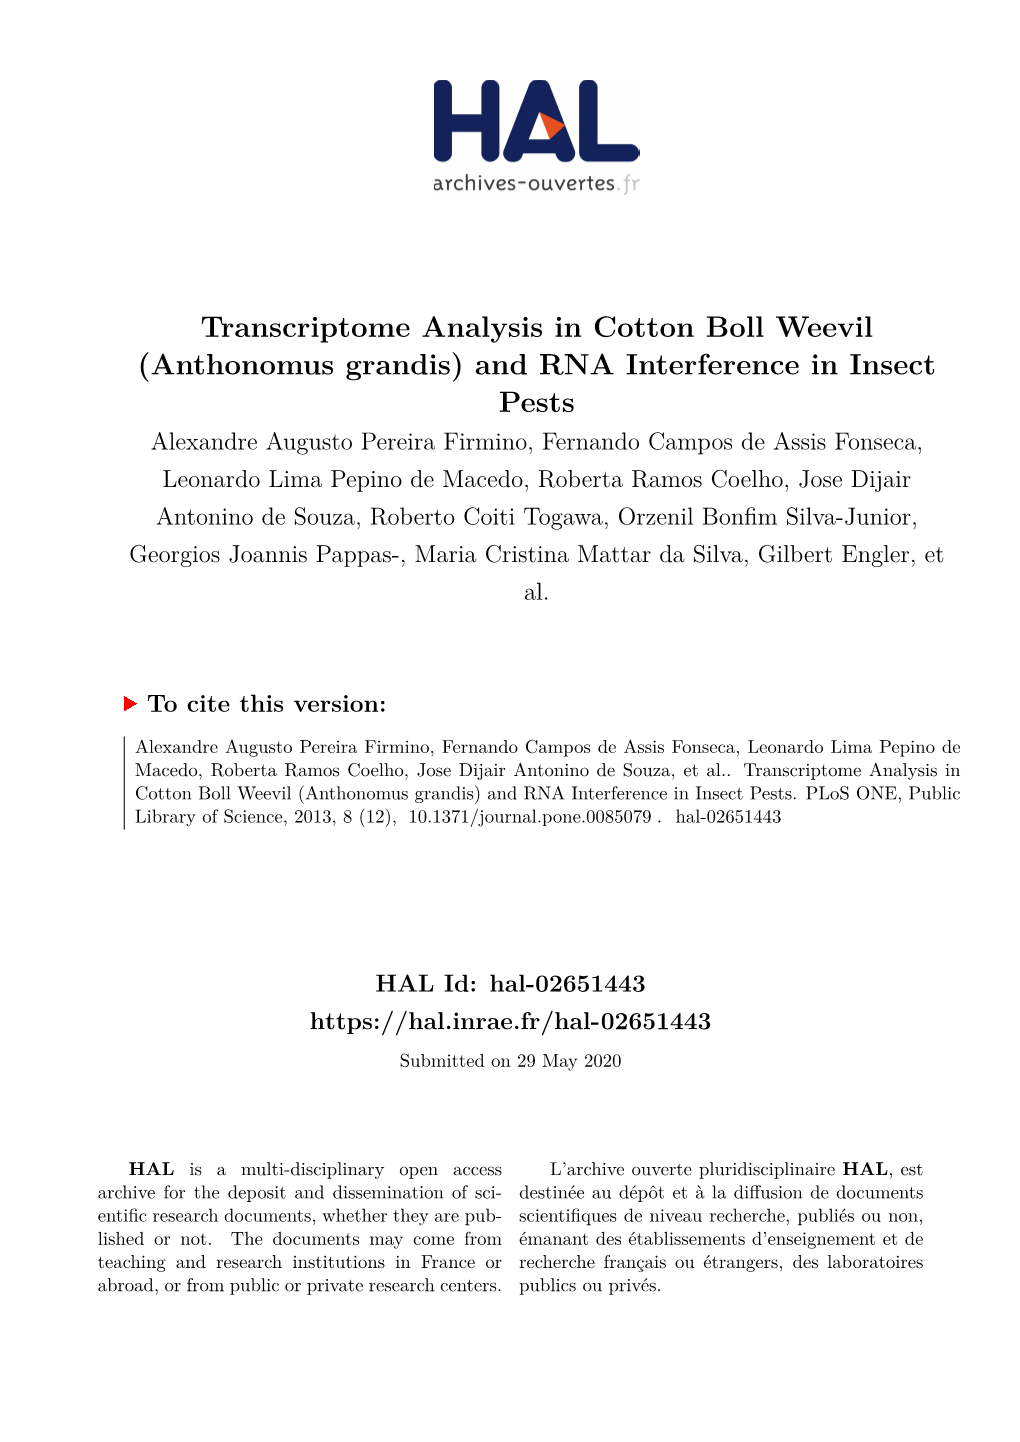 Transcriptome Analysis in Cotton Boll Weevil (Anthonomus Grandis)